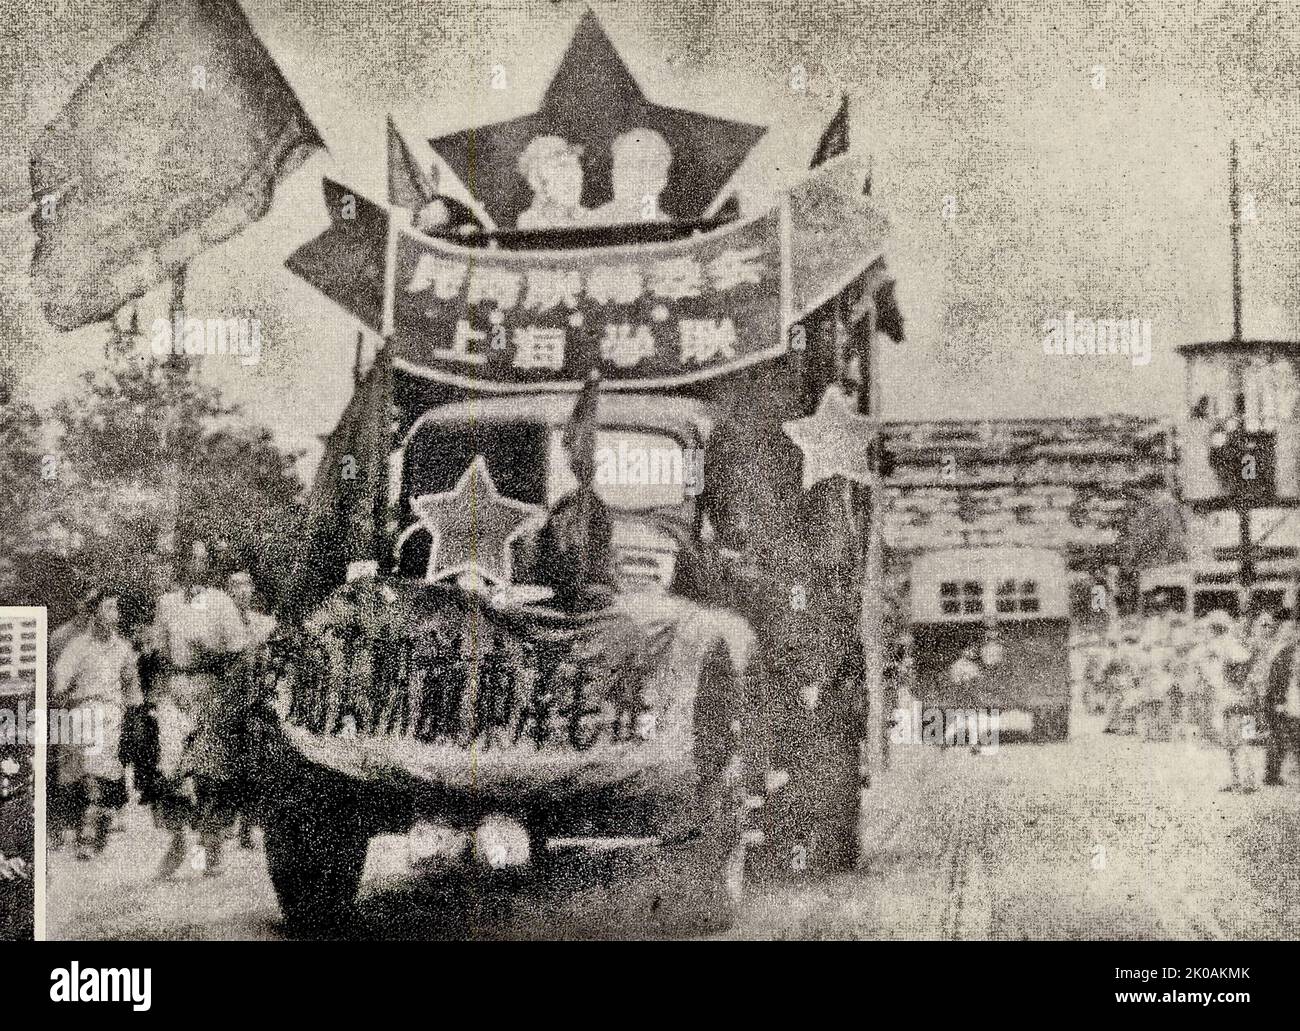 The float is used by young adults in Shanghai to celebrate Shanghai's liberation. This resulted in the takeover by communists in Shanghai. Stock Photo